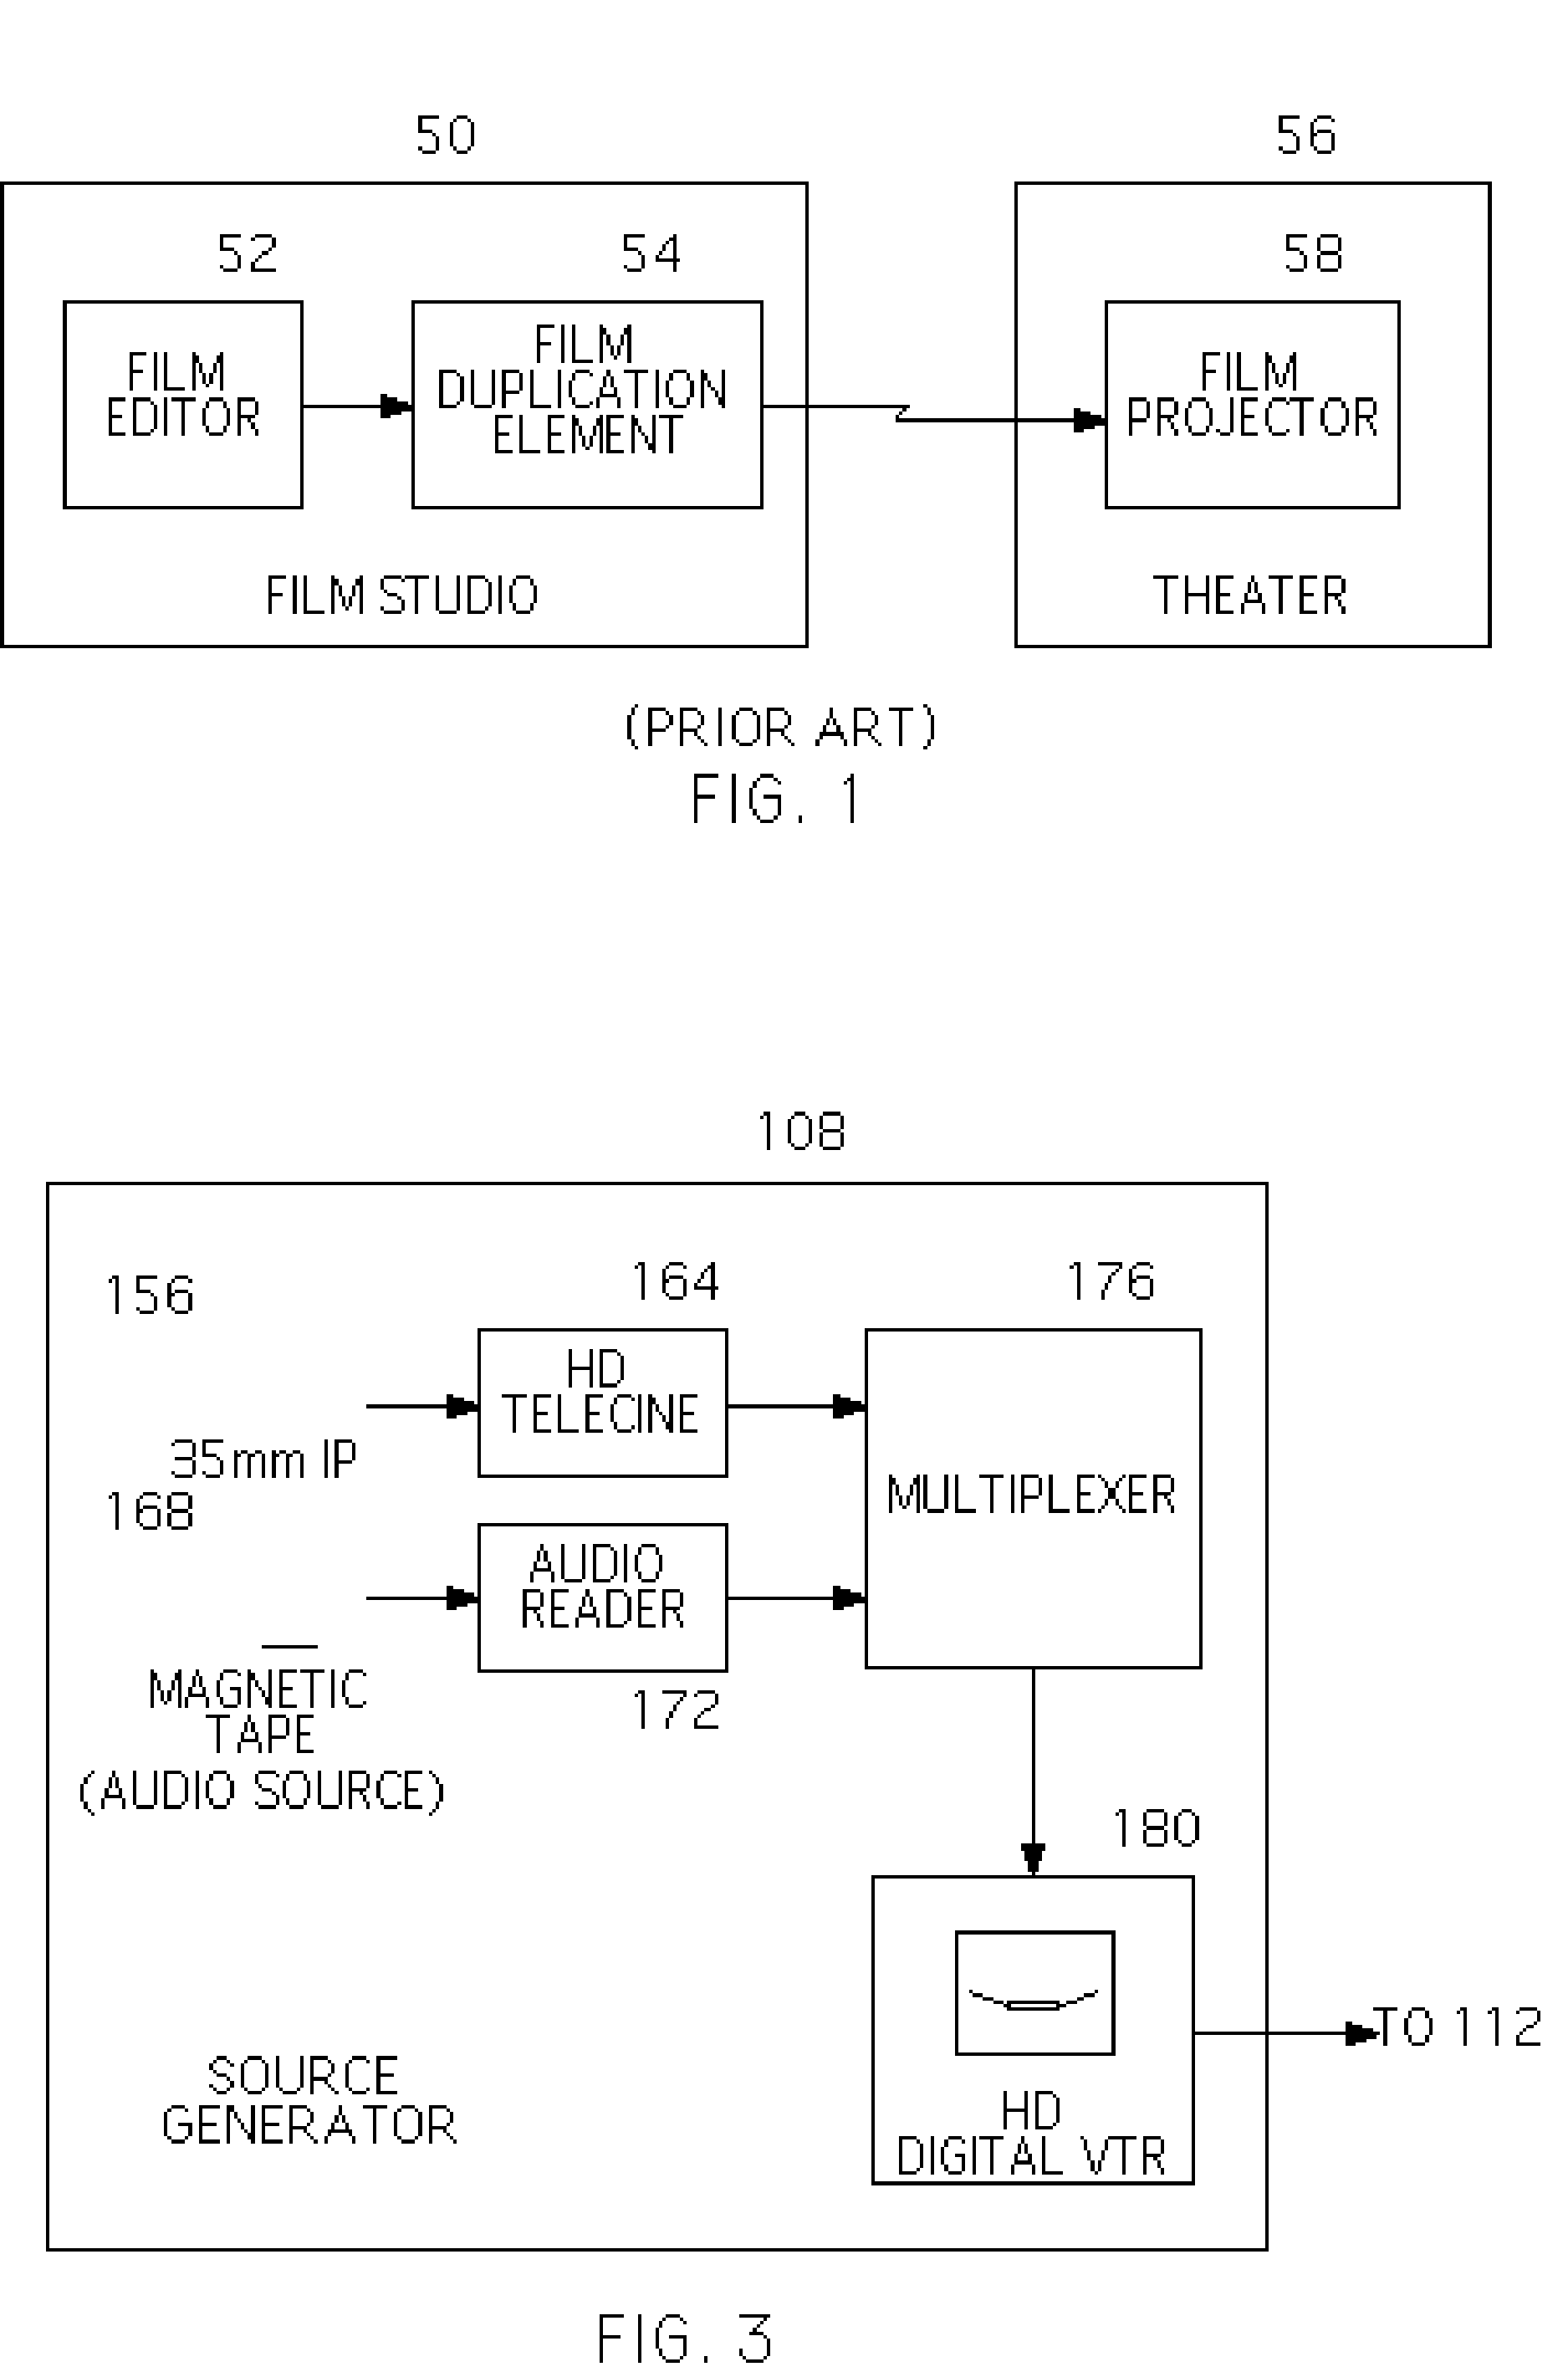 Apparatus and method for encoding and storage of digital image and audio signals